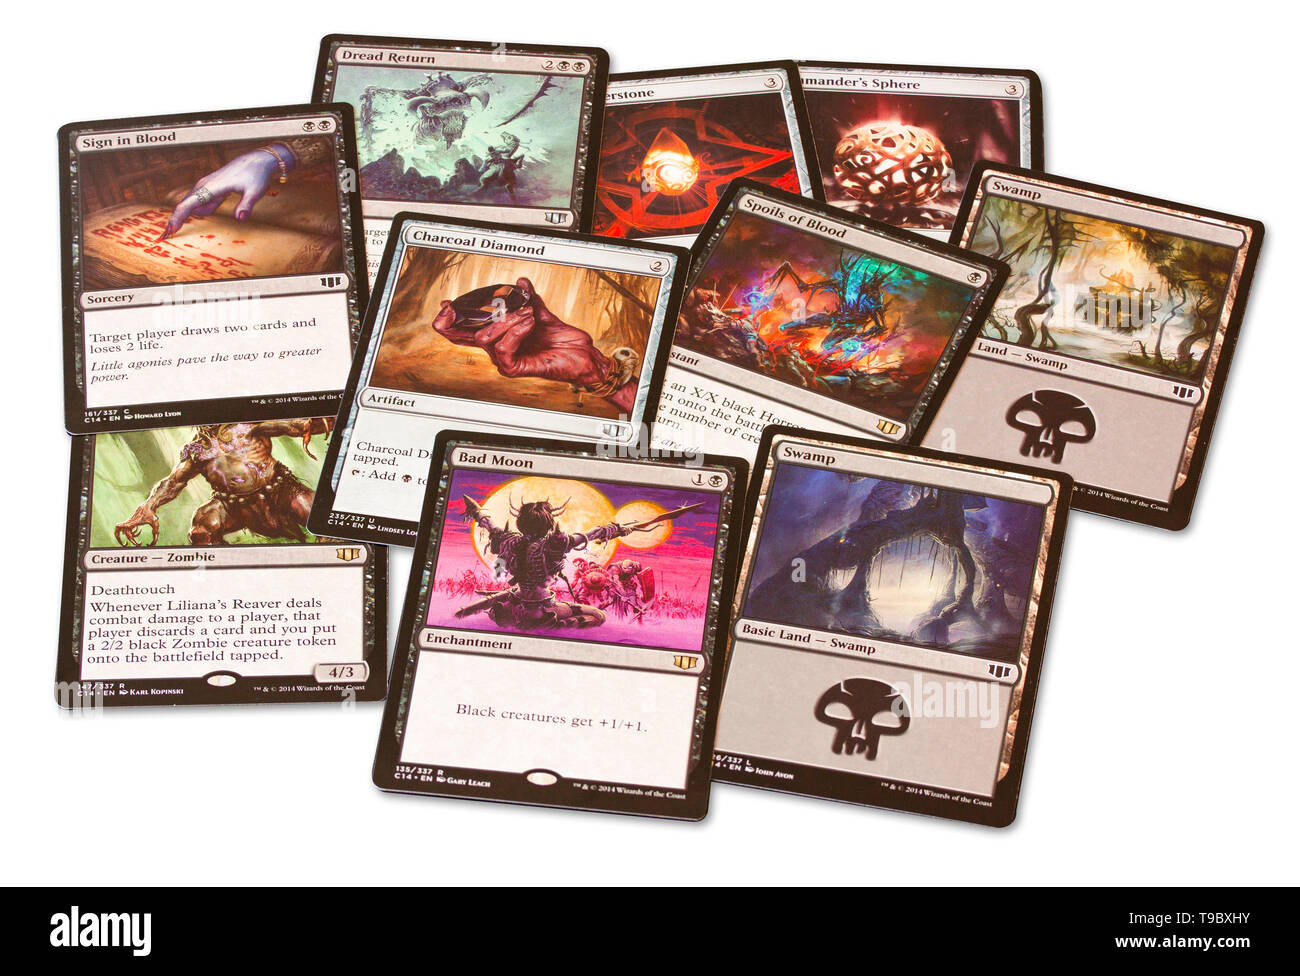 Cards of game Magic: The Gathering on white background. Magic can be played by two or more players in various rule formats. Stock Photo